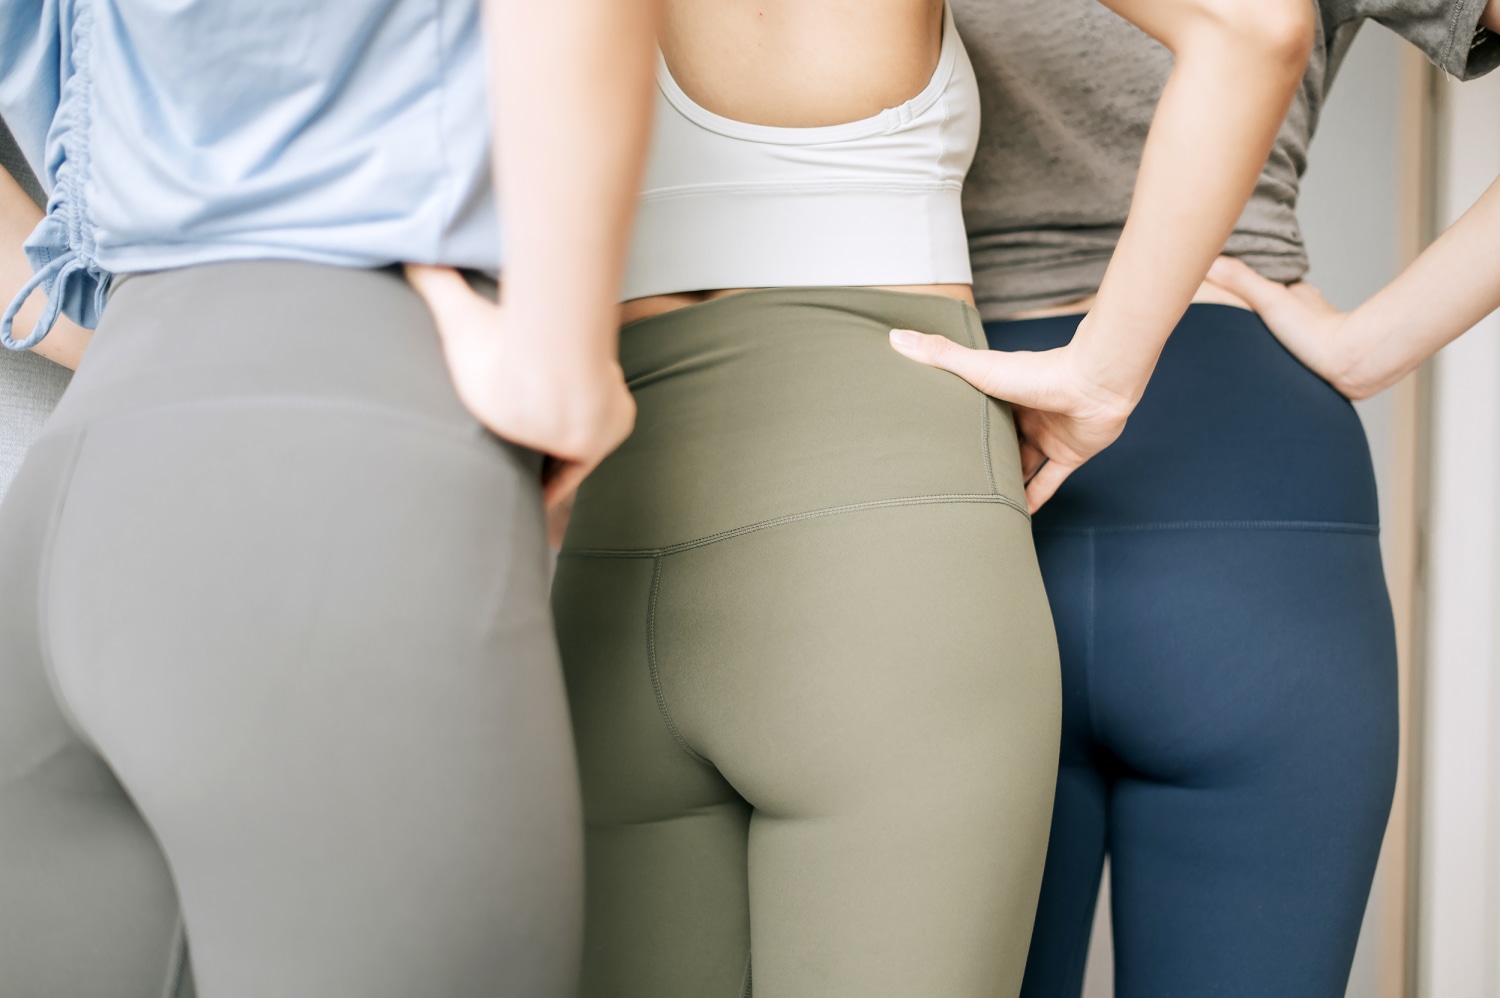 Hip dips (also known as violin hips), are the inward curves that some  people have on the sides of their bodies, just below the hips